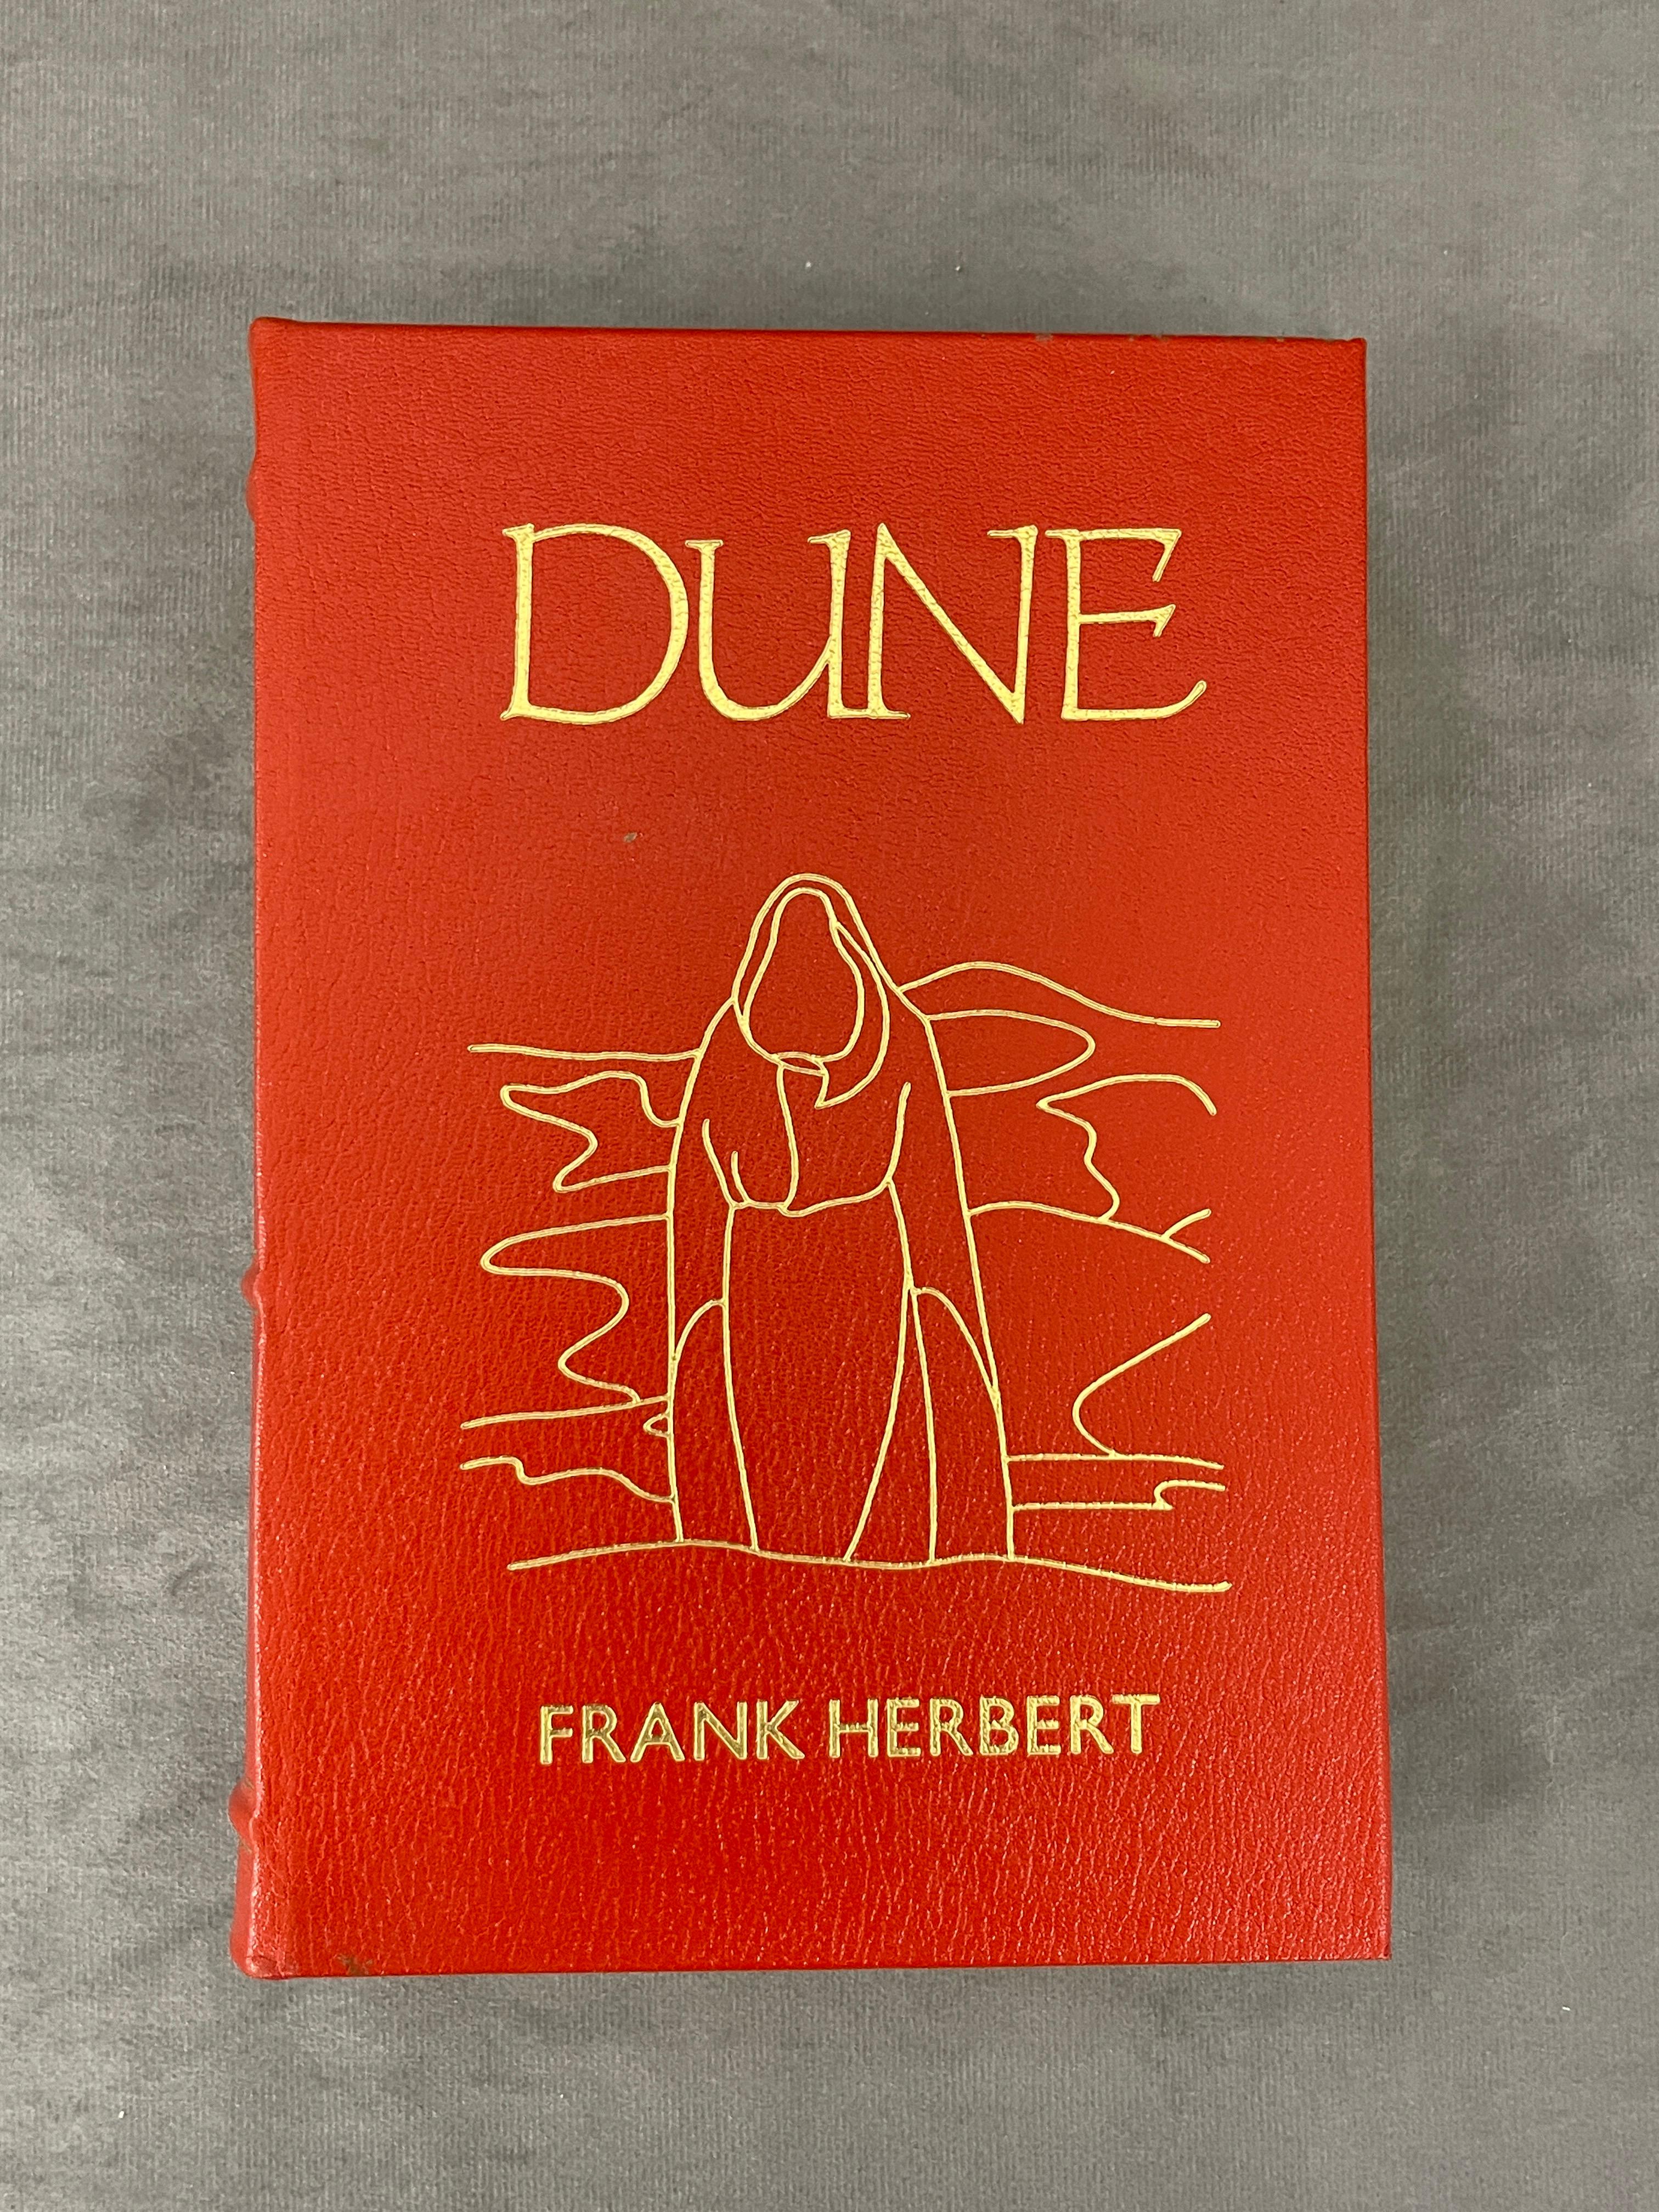 Dune by Frank Herbert Memorial Collectors Edition Easton Press Hardcover Leather Book